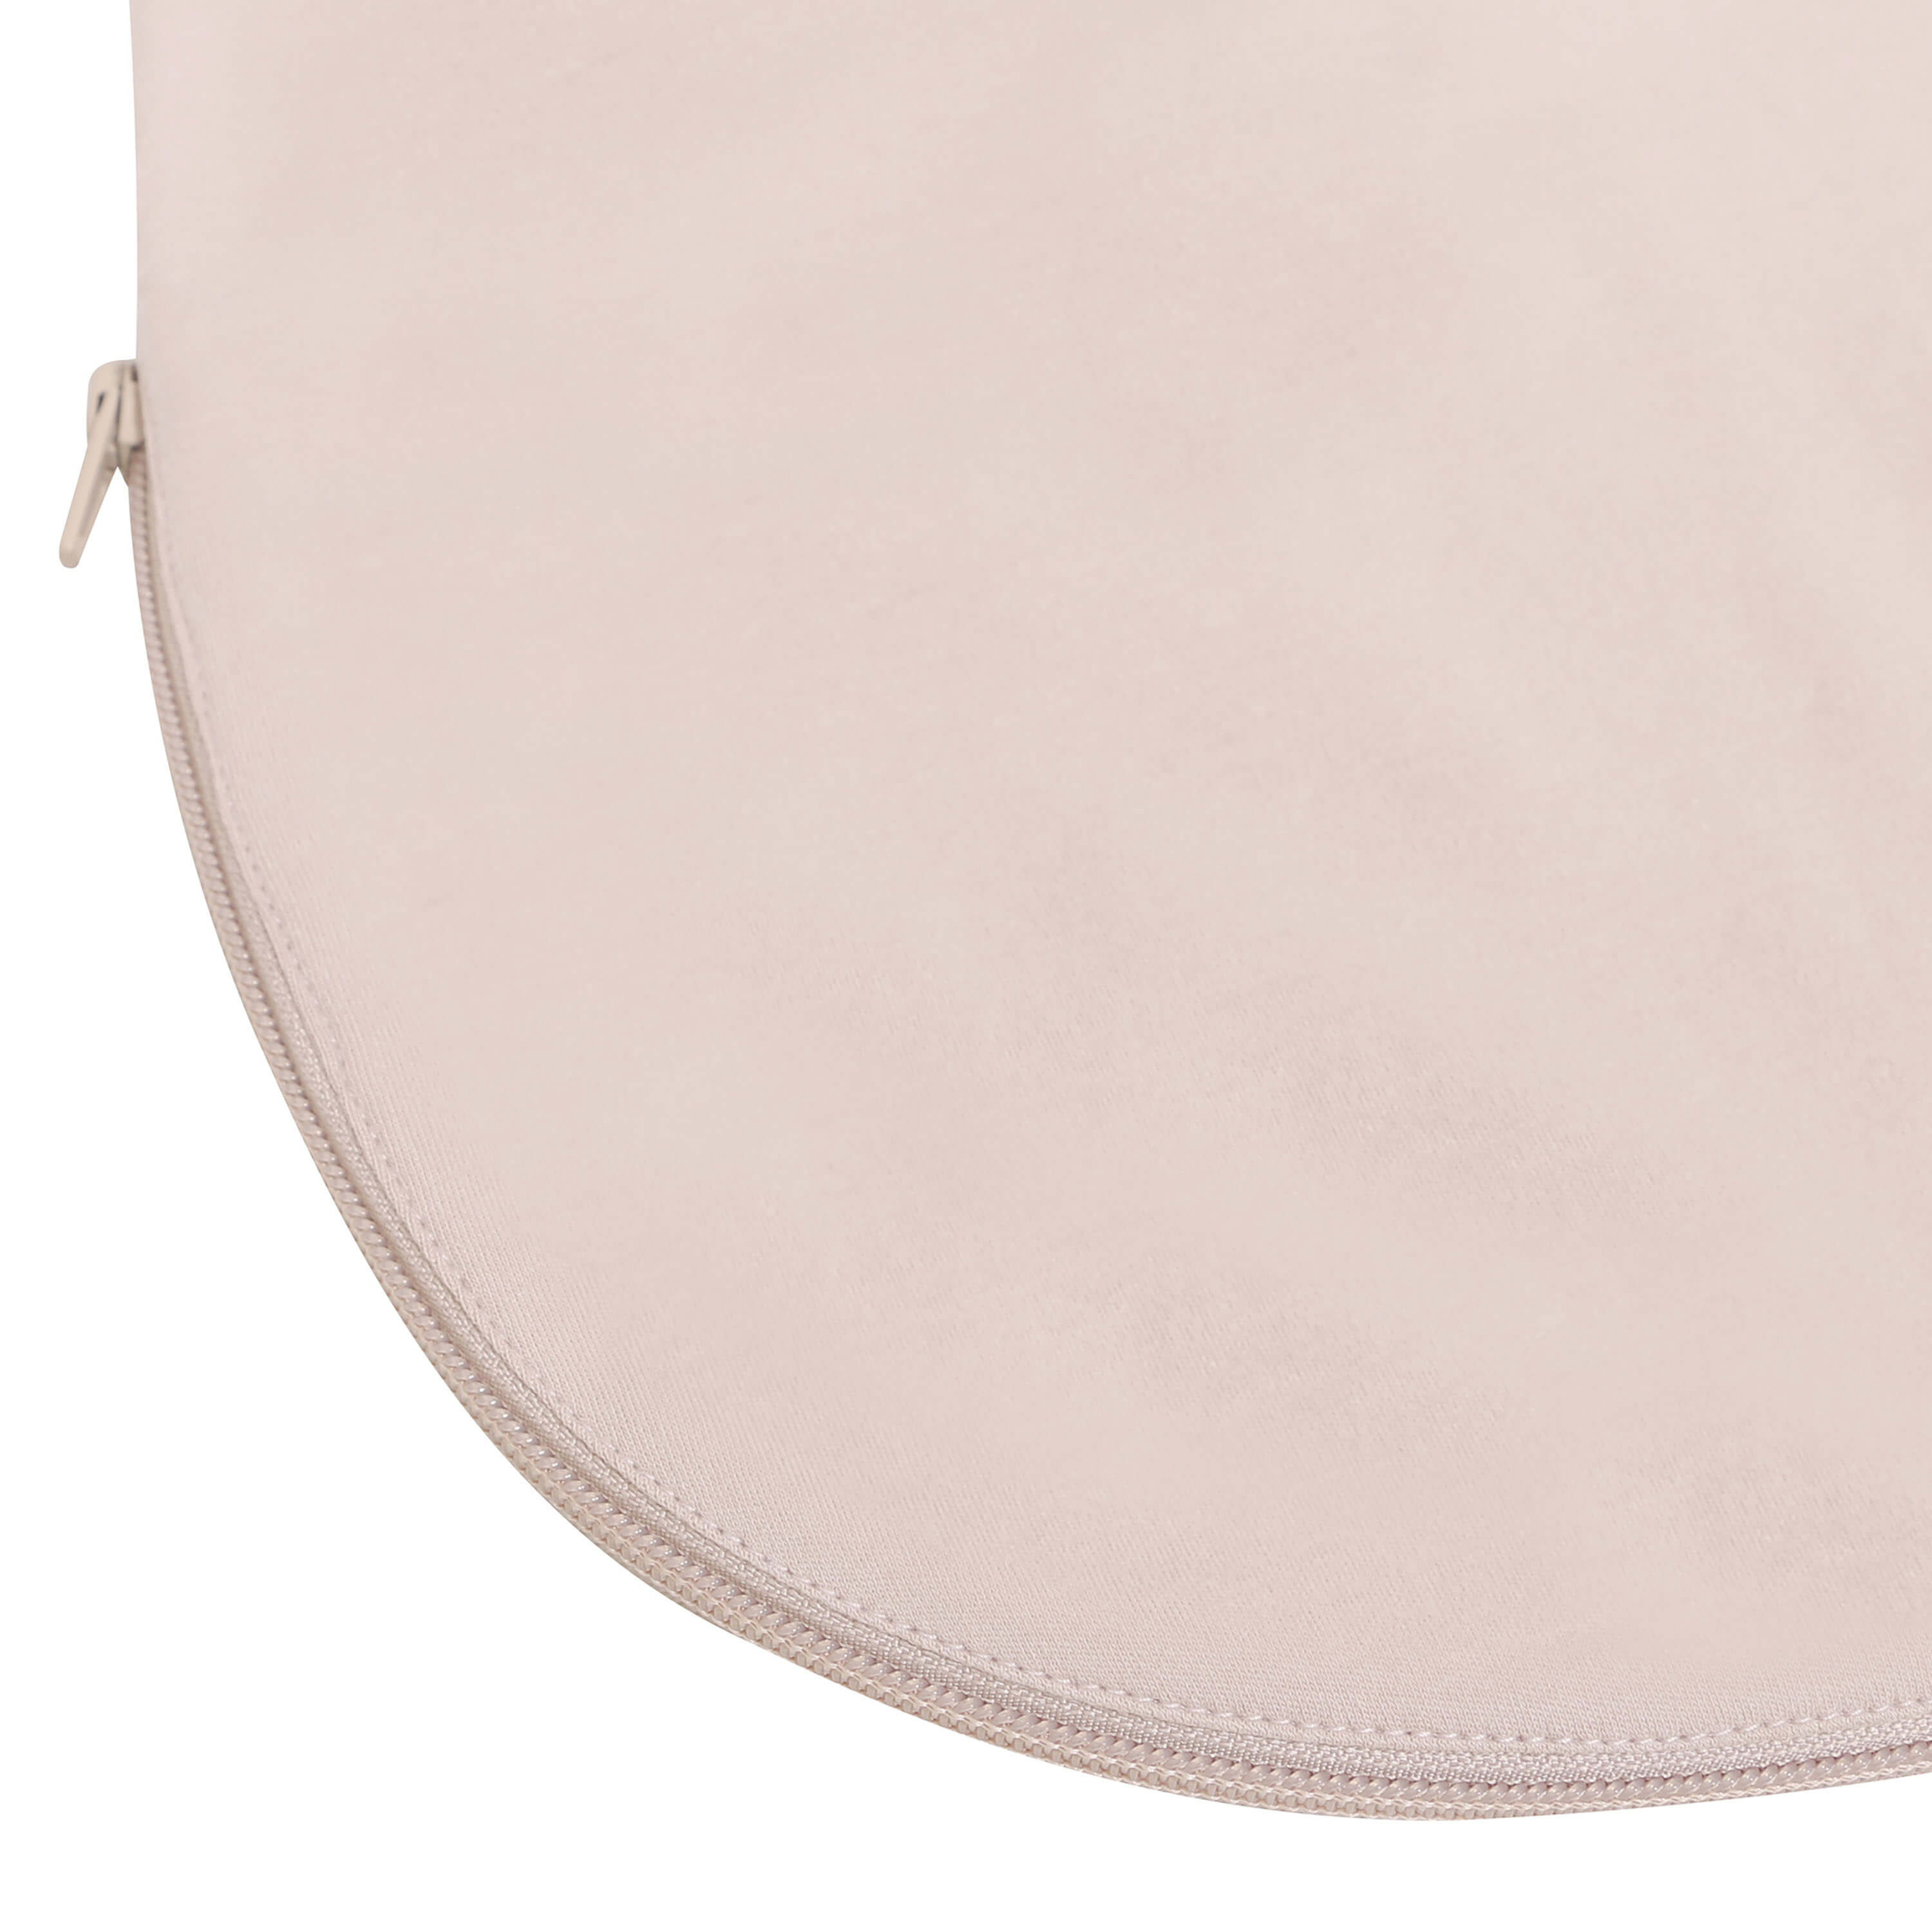 Camel Wool Winter Sleep Sack With Arms 3.5 TOG - Dusty Pink